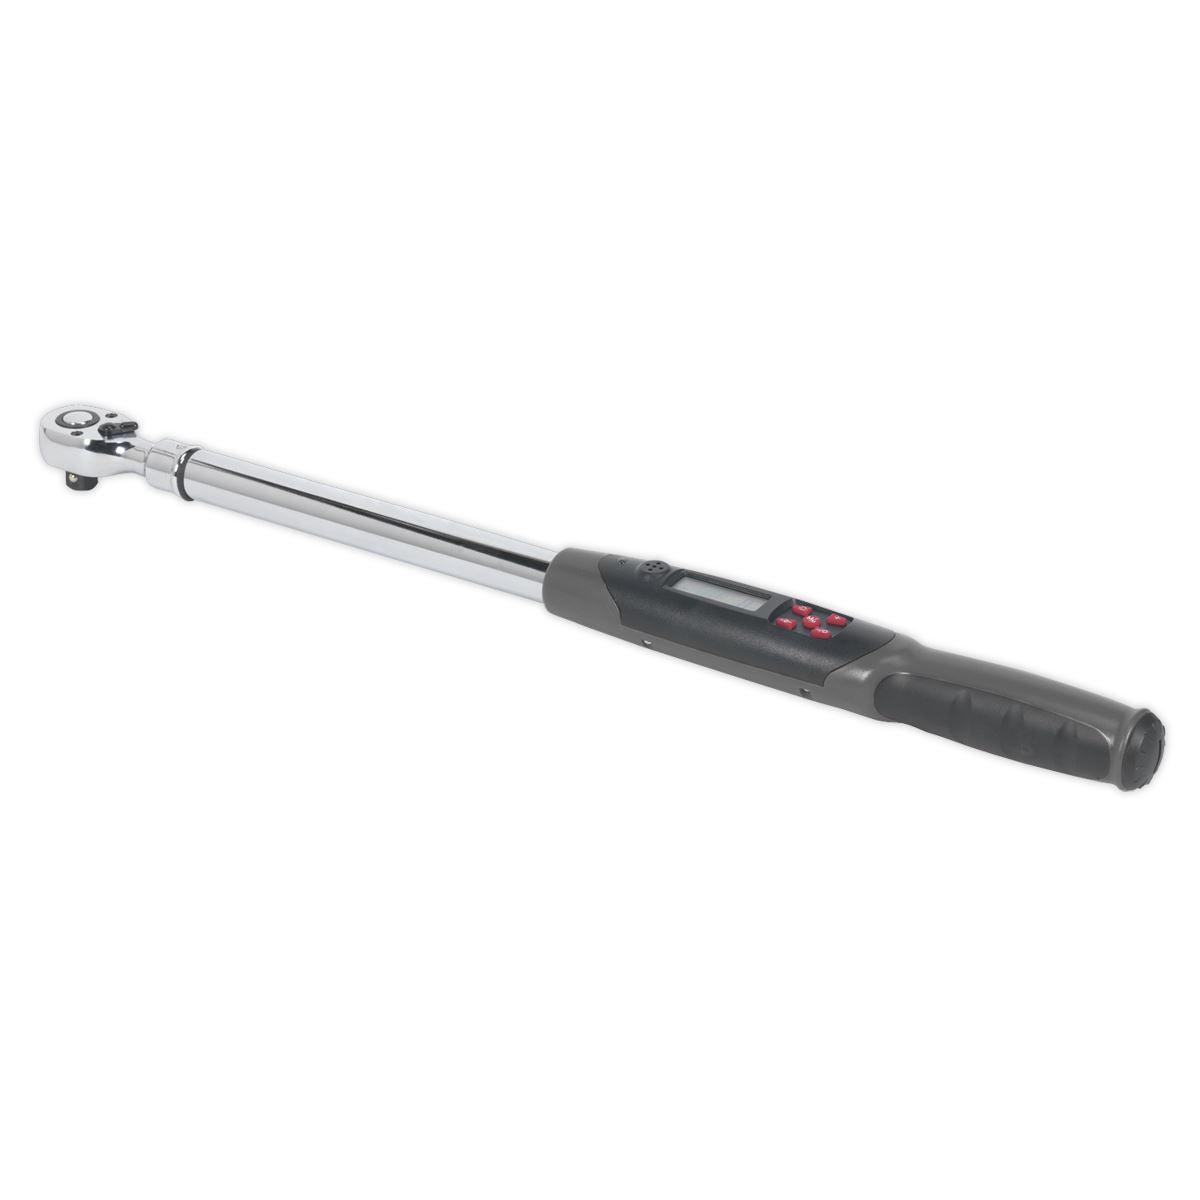 Sealey Premier Angle Torque Wrench Digital 1/2"Sq Drive 20-200Nm(14.7-147.5lb.ft)